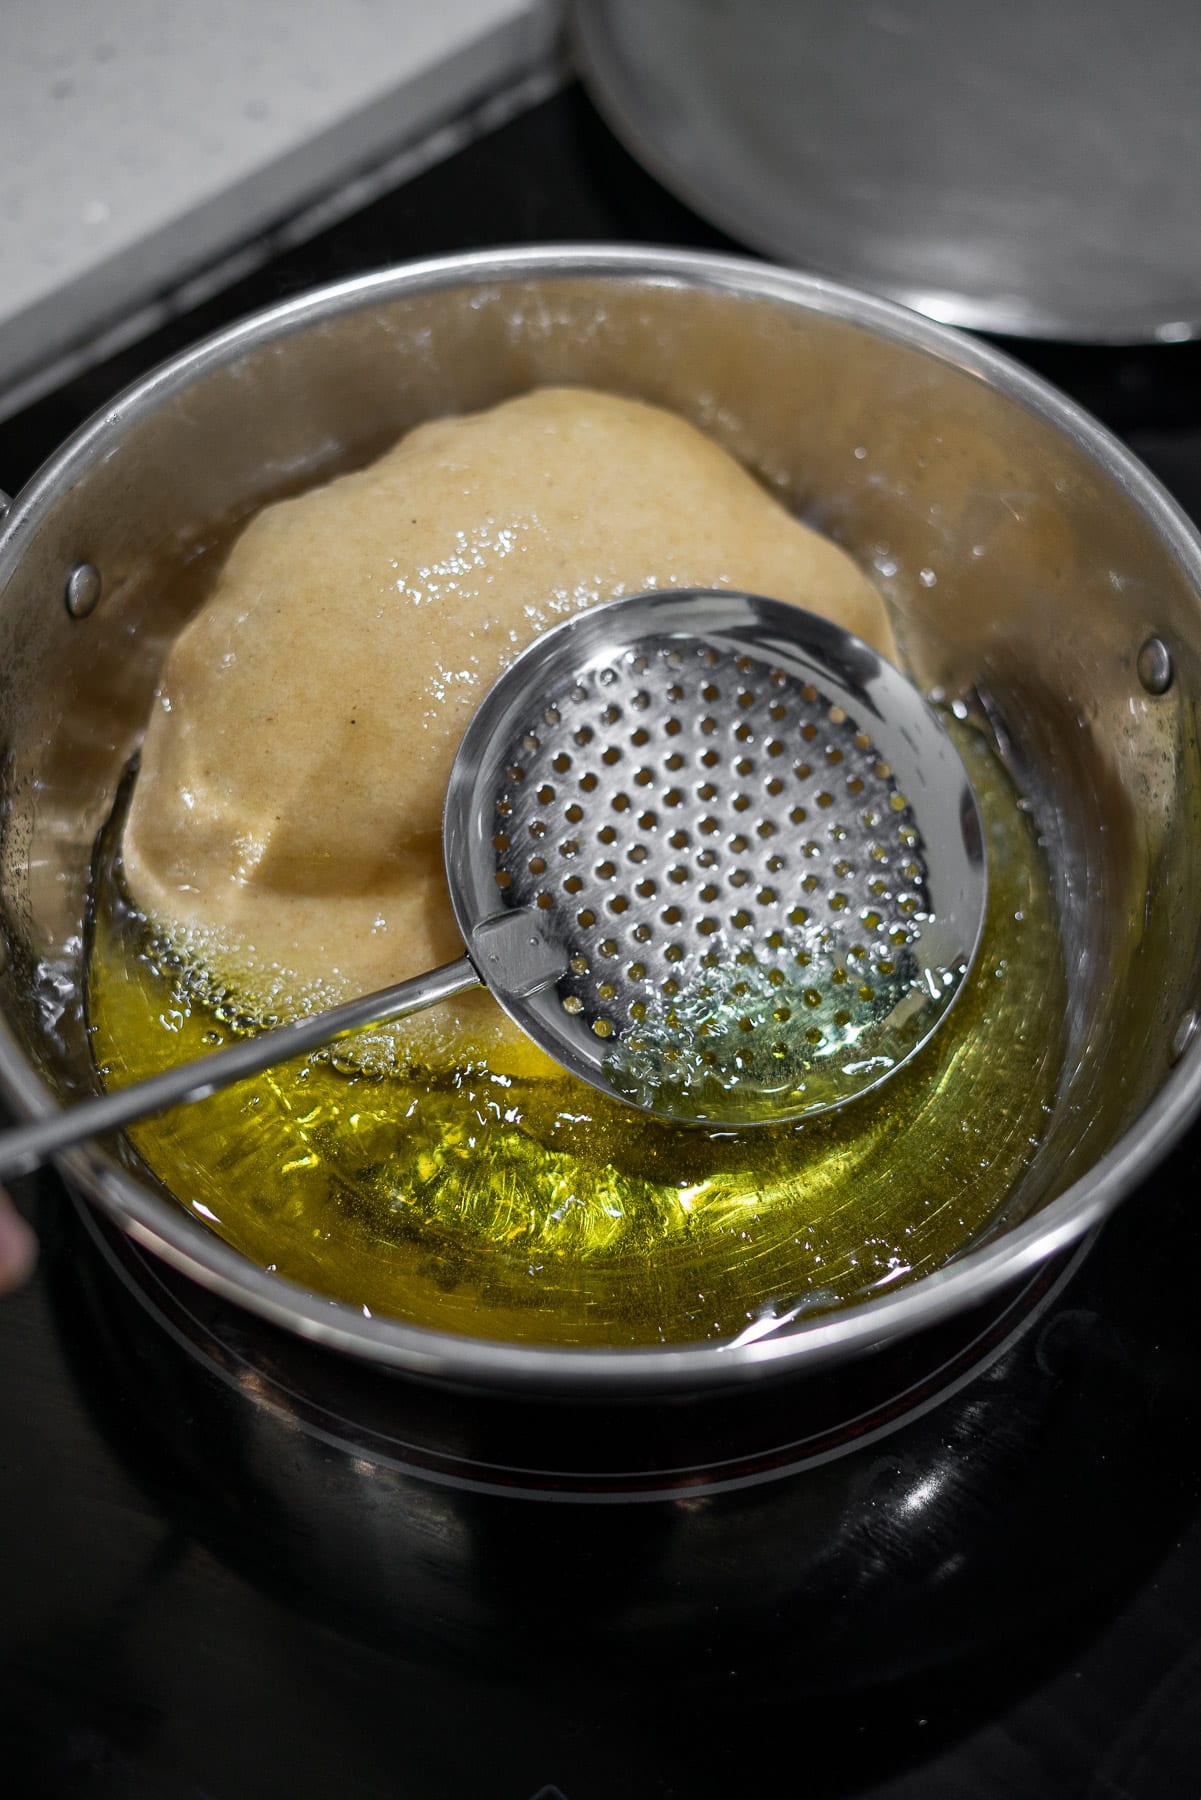 bhatura being fried in oil and beginning to puff